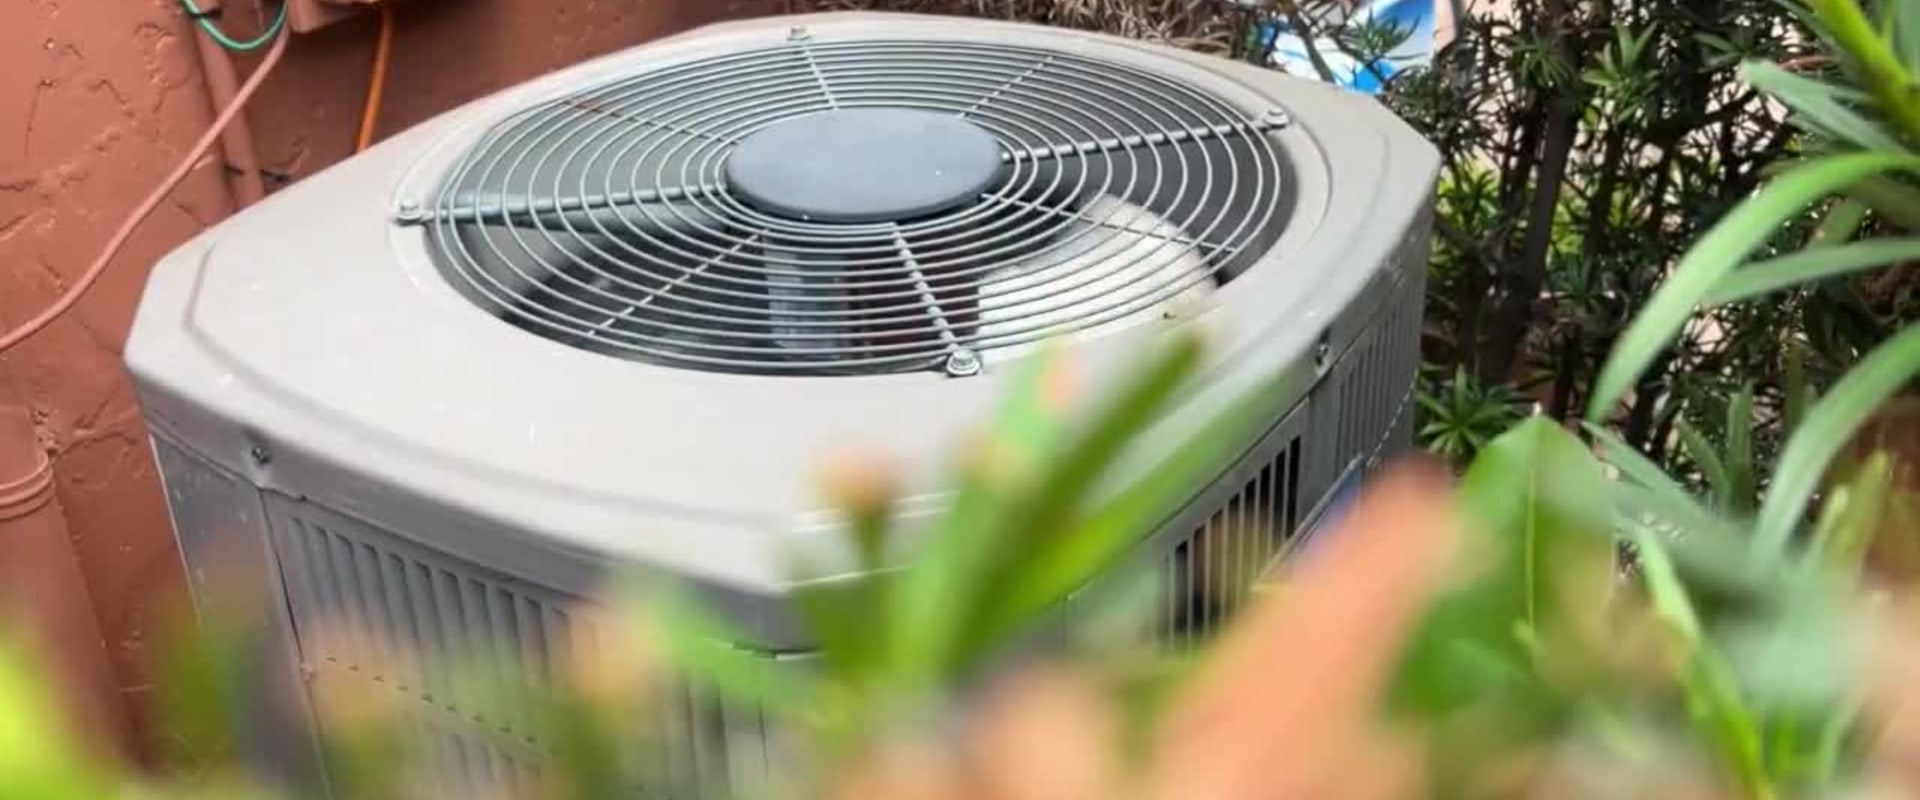 Replacing an Old or Outdated HVAC System in West Palm Beach, FL: What You Need to Know